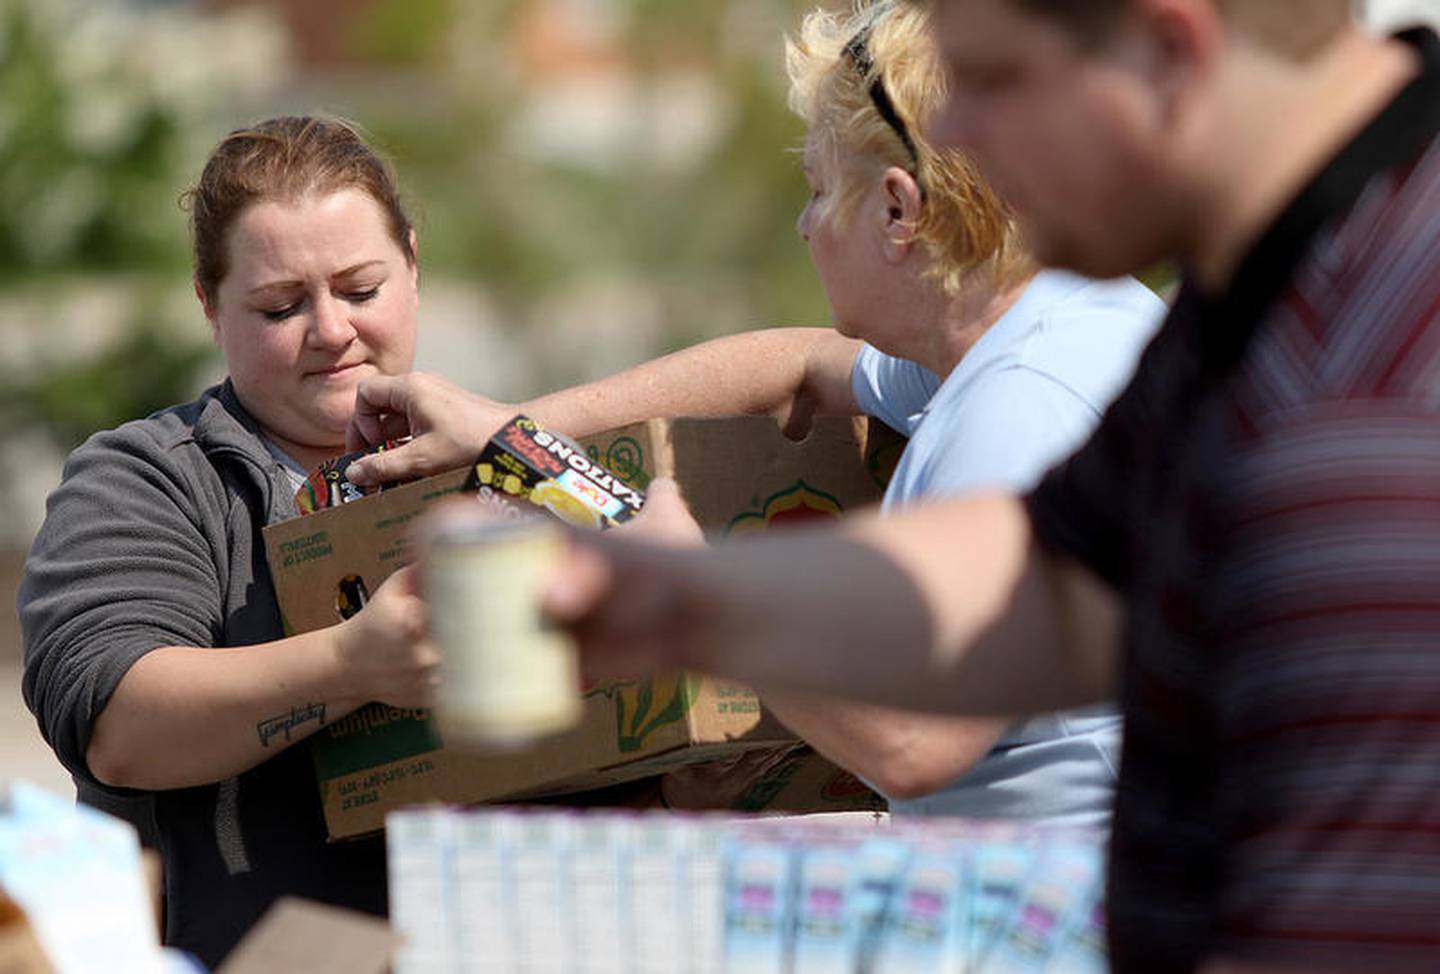 The late Cindy Graves (back right), Director of Community Health and Prevention at the DeKalb County Health Department helps fill a box of food for Allie McWilliams of DeKalb (left) at the Northern Illinois Food Bank's truck during a Healthy Start to School event at DeKalb County Health Department on Thursday, Aug. 3, 2017 in DeKalb. Graves died May 22, 2022 at Kishwaukee Hospital in DeKalb.